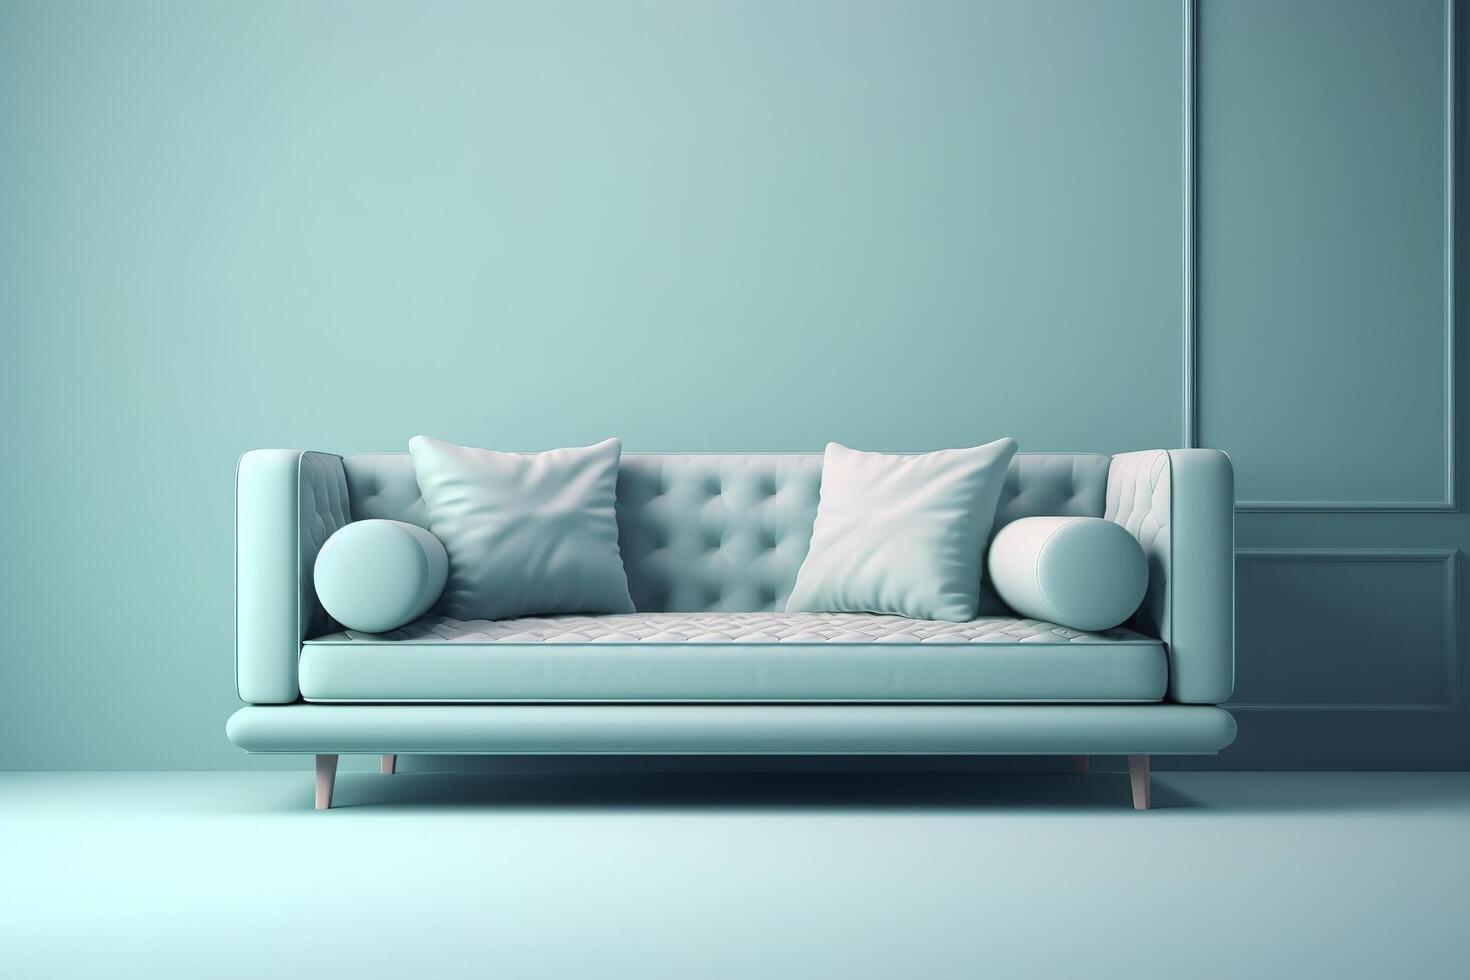 Soft blue sofa on a blue background, 3D illustration, Modern minimalistic living room interior detail. Cosiness, social media and sale concept, creative advertisement idea, image. photo